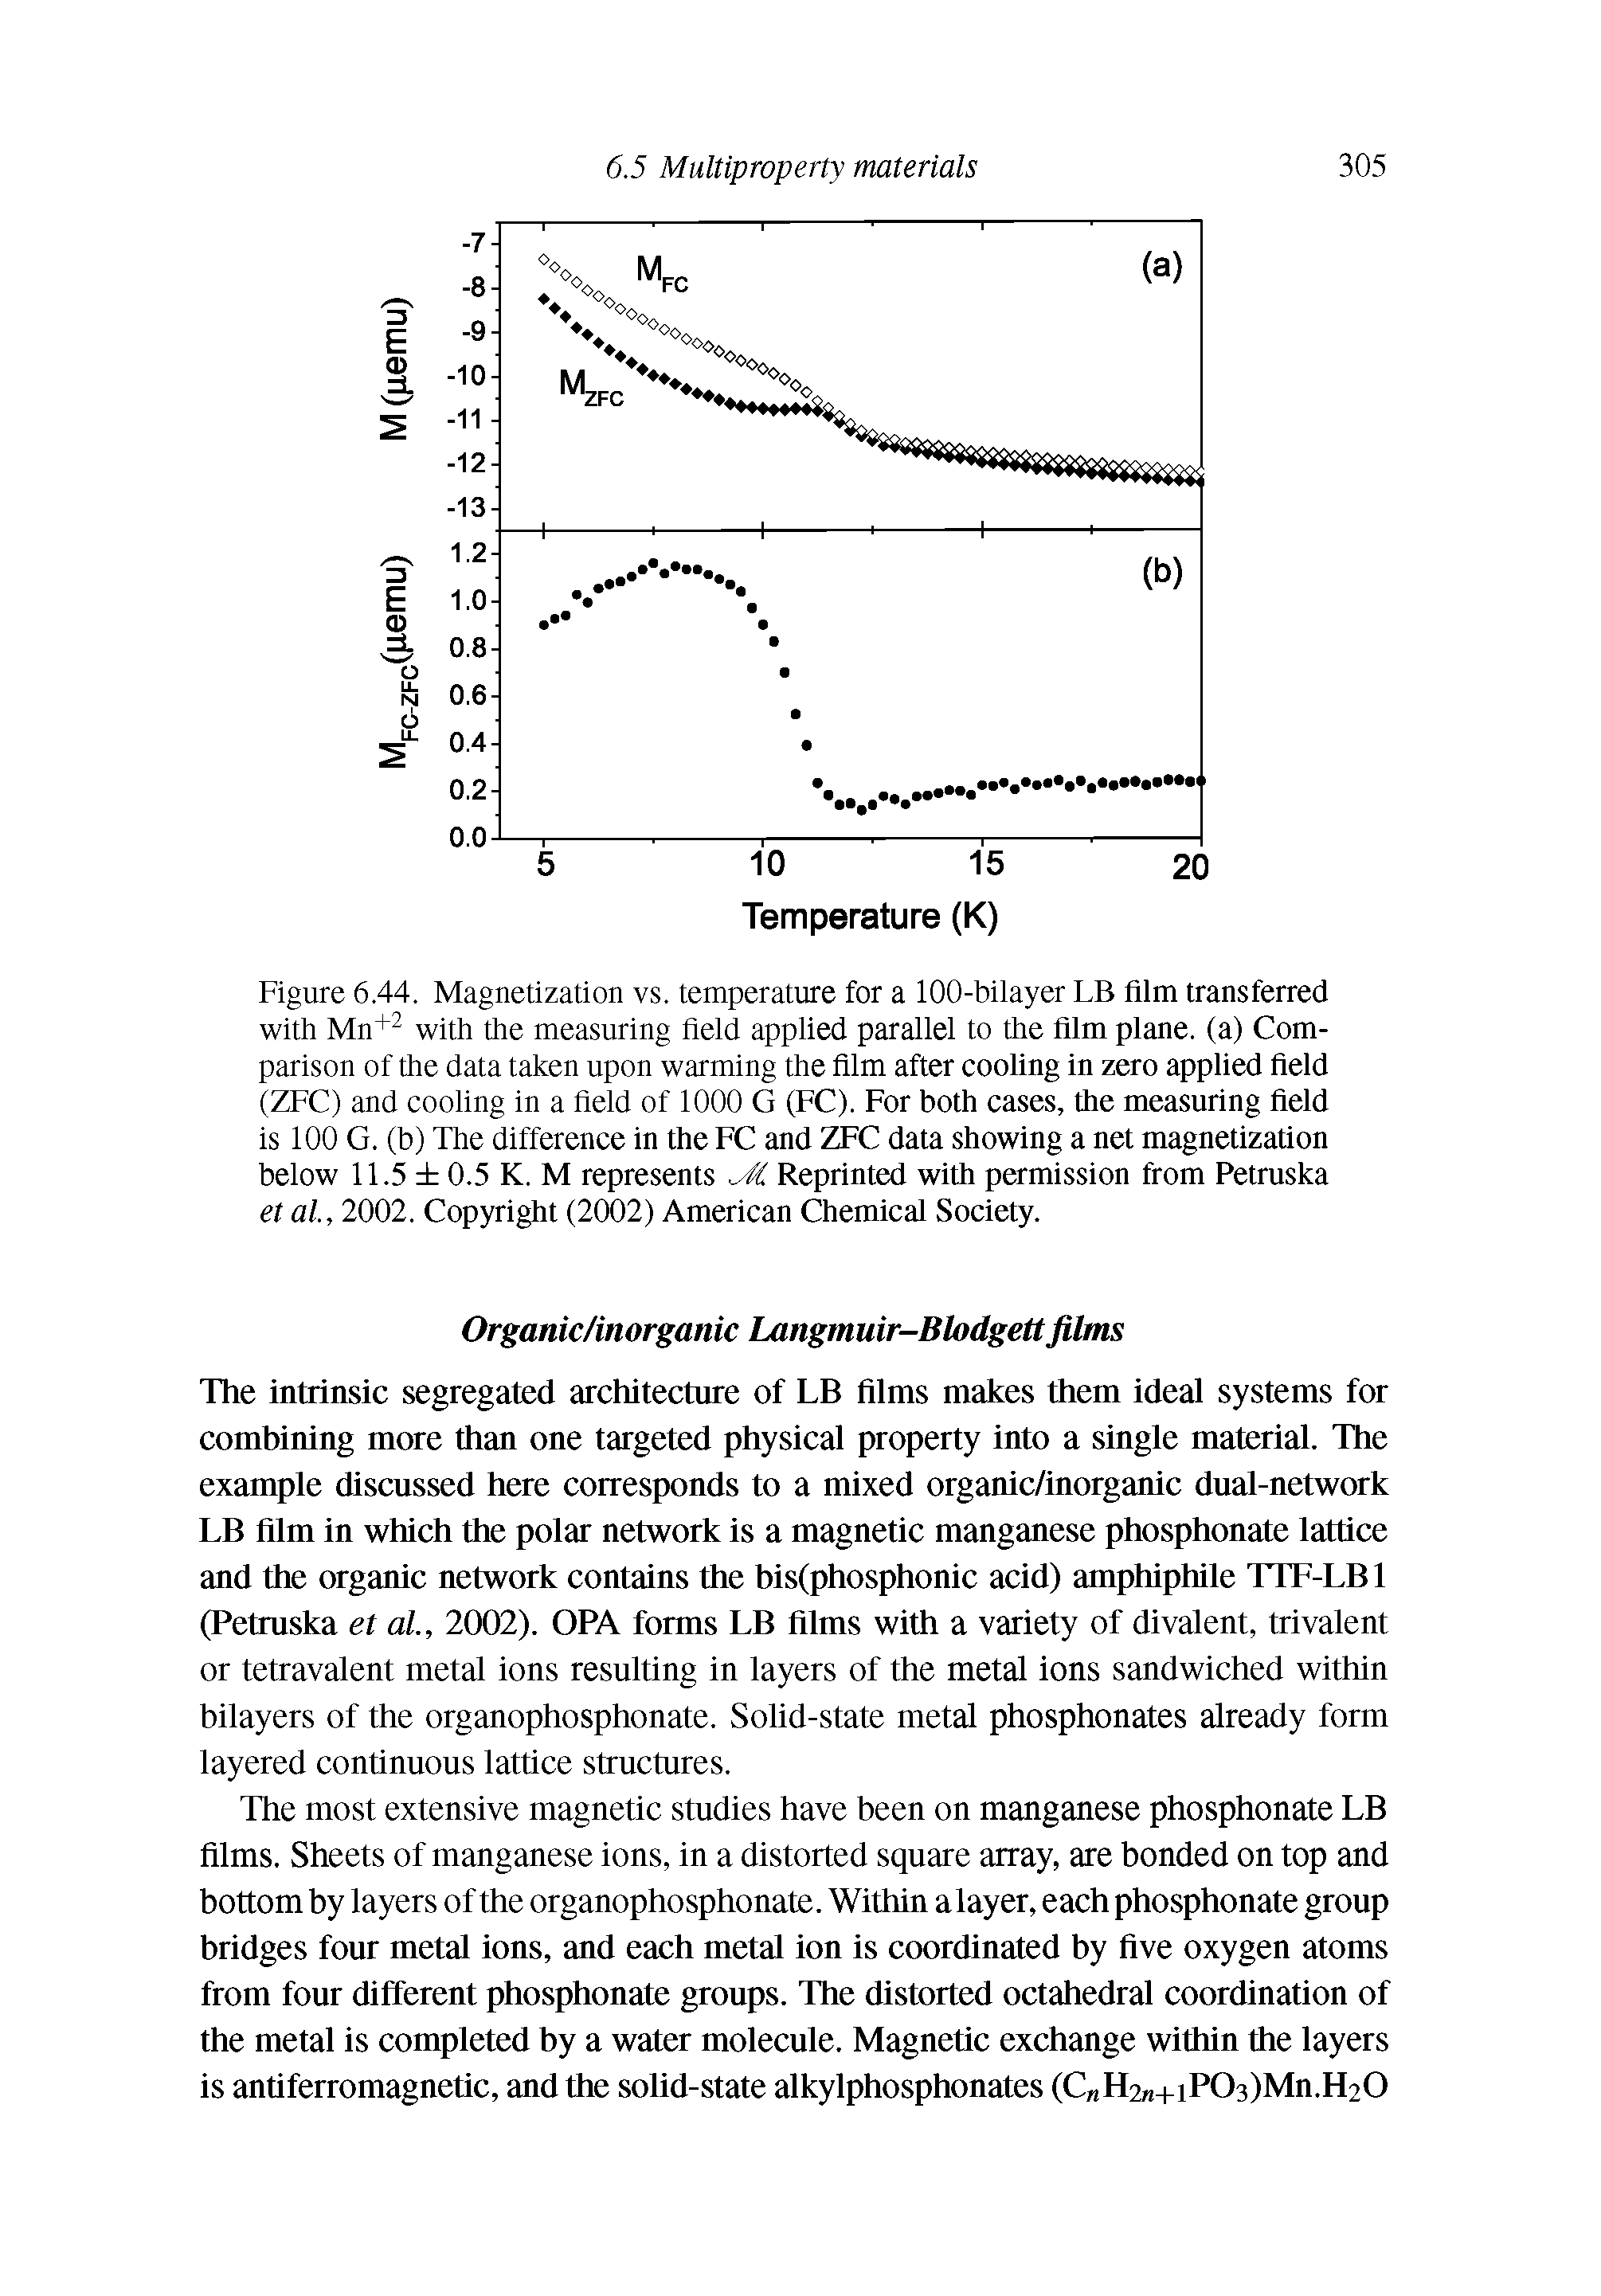 Figure 6.44. Magnetization vs. temperature for a 100-bilayer LB film transferred with Mn+ with the measuring field applied parallel to the film plane, (a) Comparison of the data taken upon warming the film after cooling in zero applied field (ZFC) and cooling in a field of 1000 G (FC). For both cases, the measuring field is 100 G. (b) The difference in the FC and ZFC data showing a net magnetization below 11.5 0.5 K. M represents Reprinted with permission from Petruska et al, 2002. Copyright (2002) American Chemical Society.